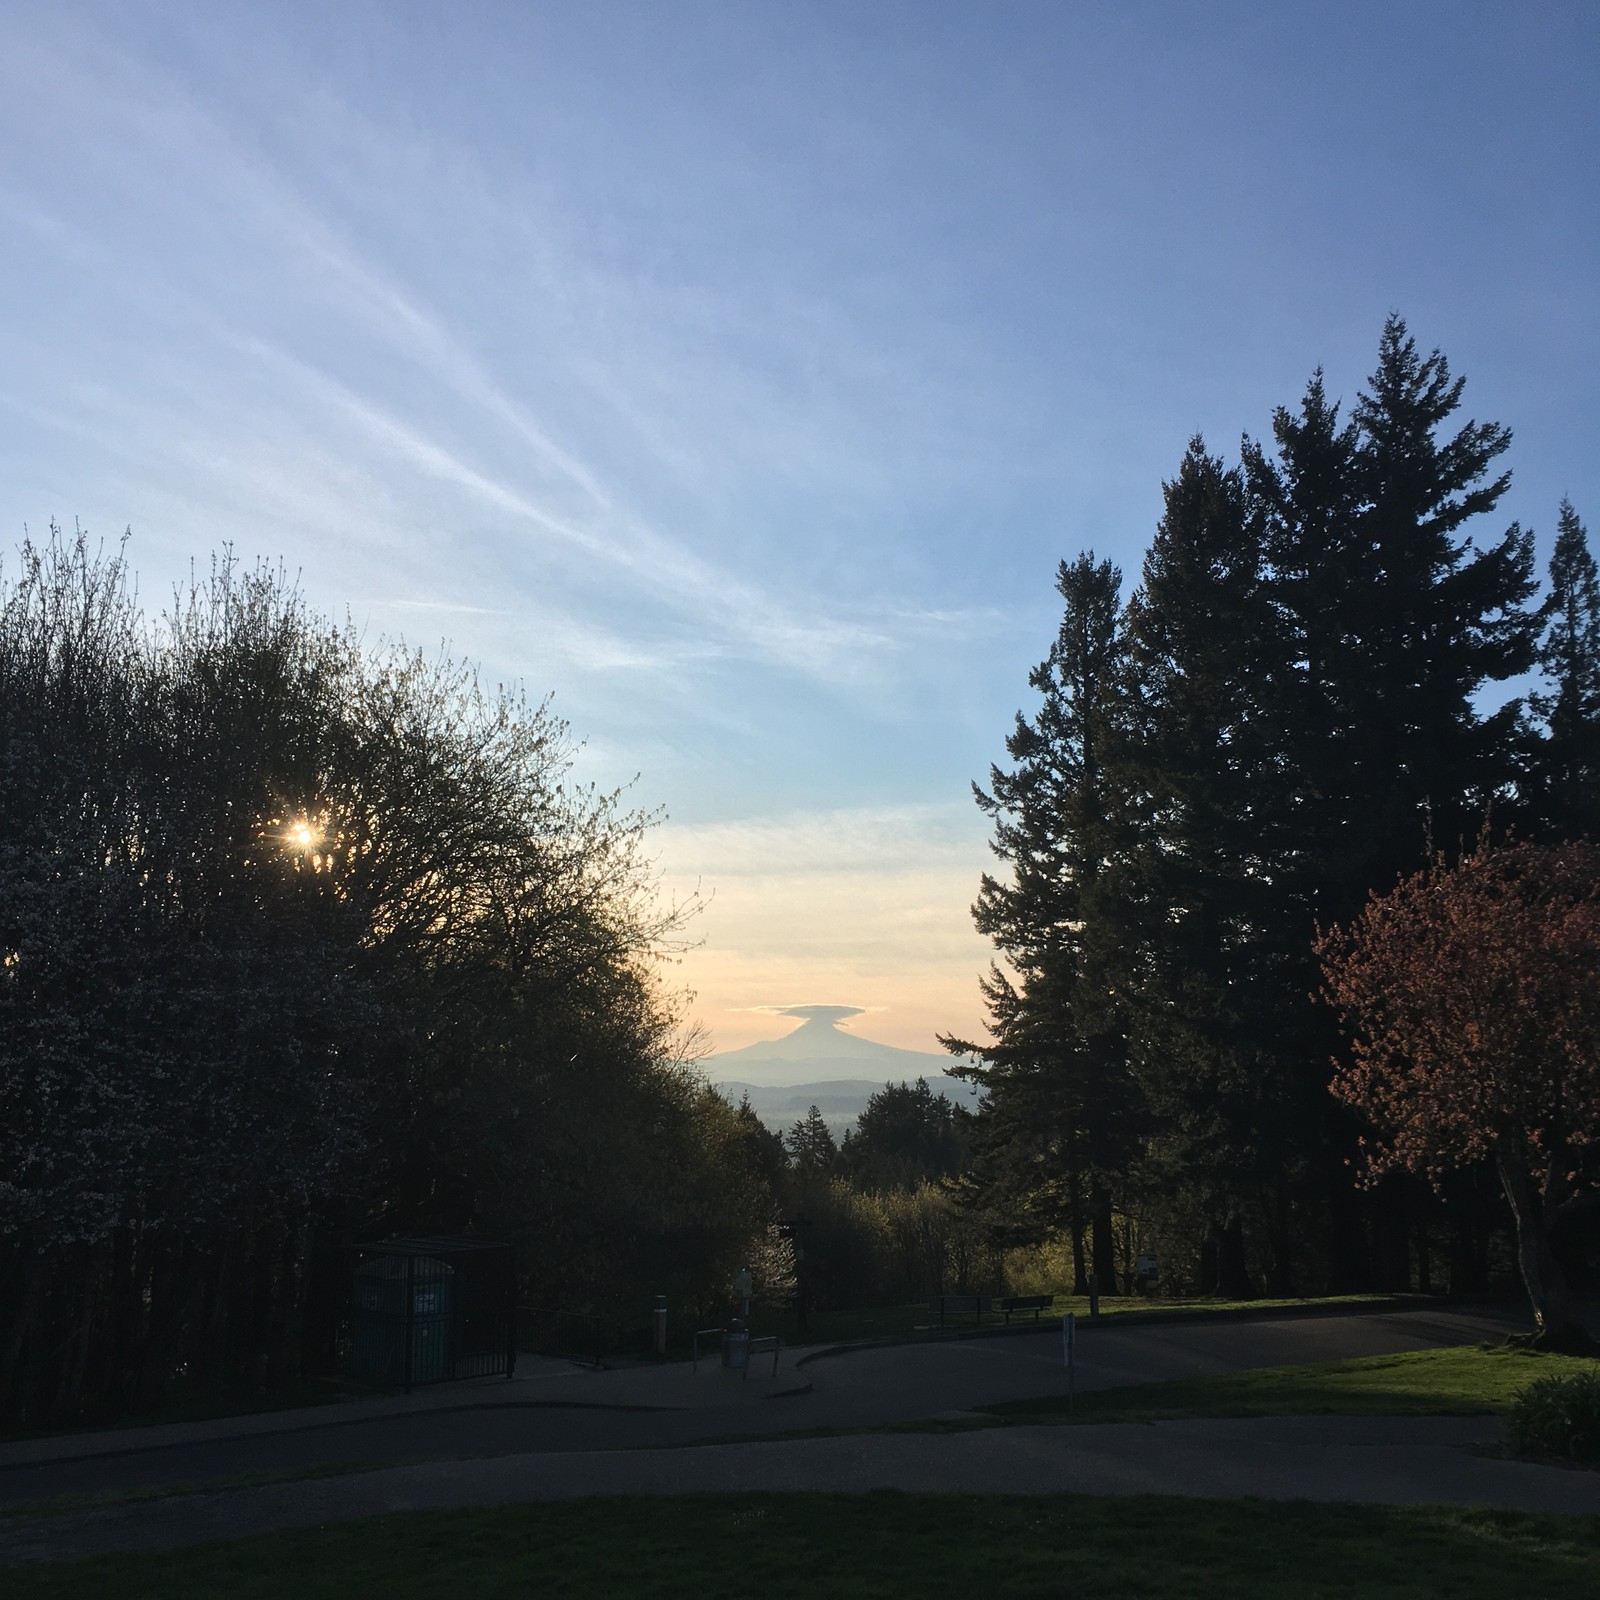 View from Council Crest Park toward Mt. Hood, which is visible in a late spring sunrise. A lenticular cloud encircles the very top of the mountain